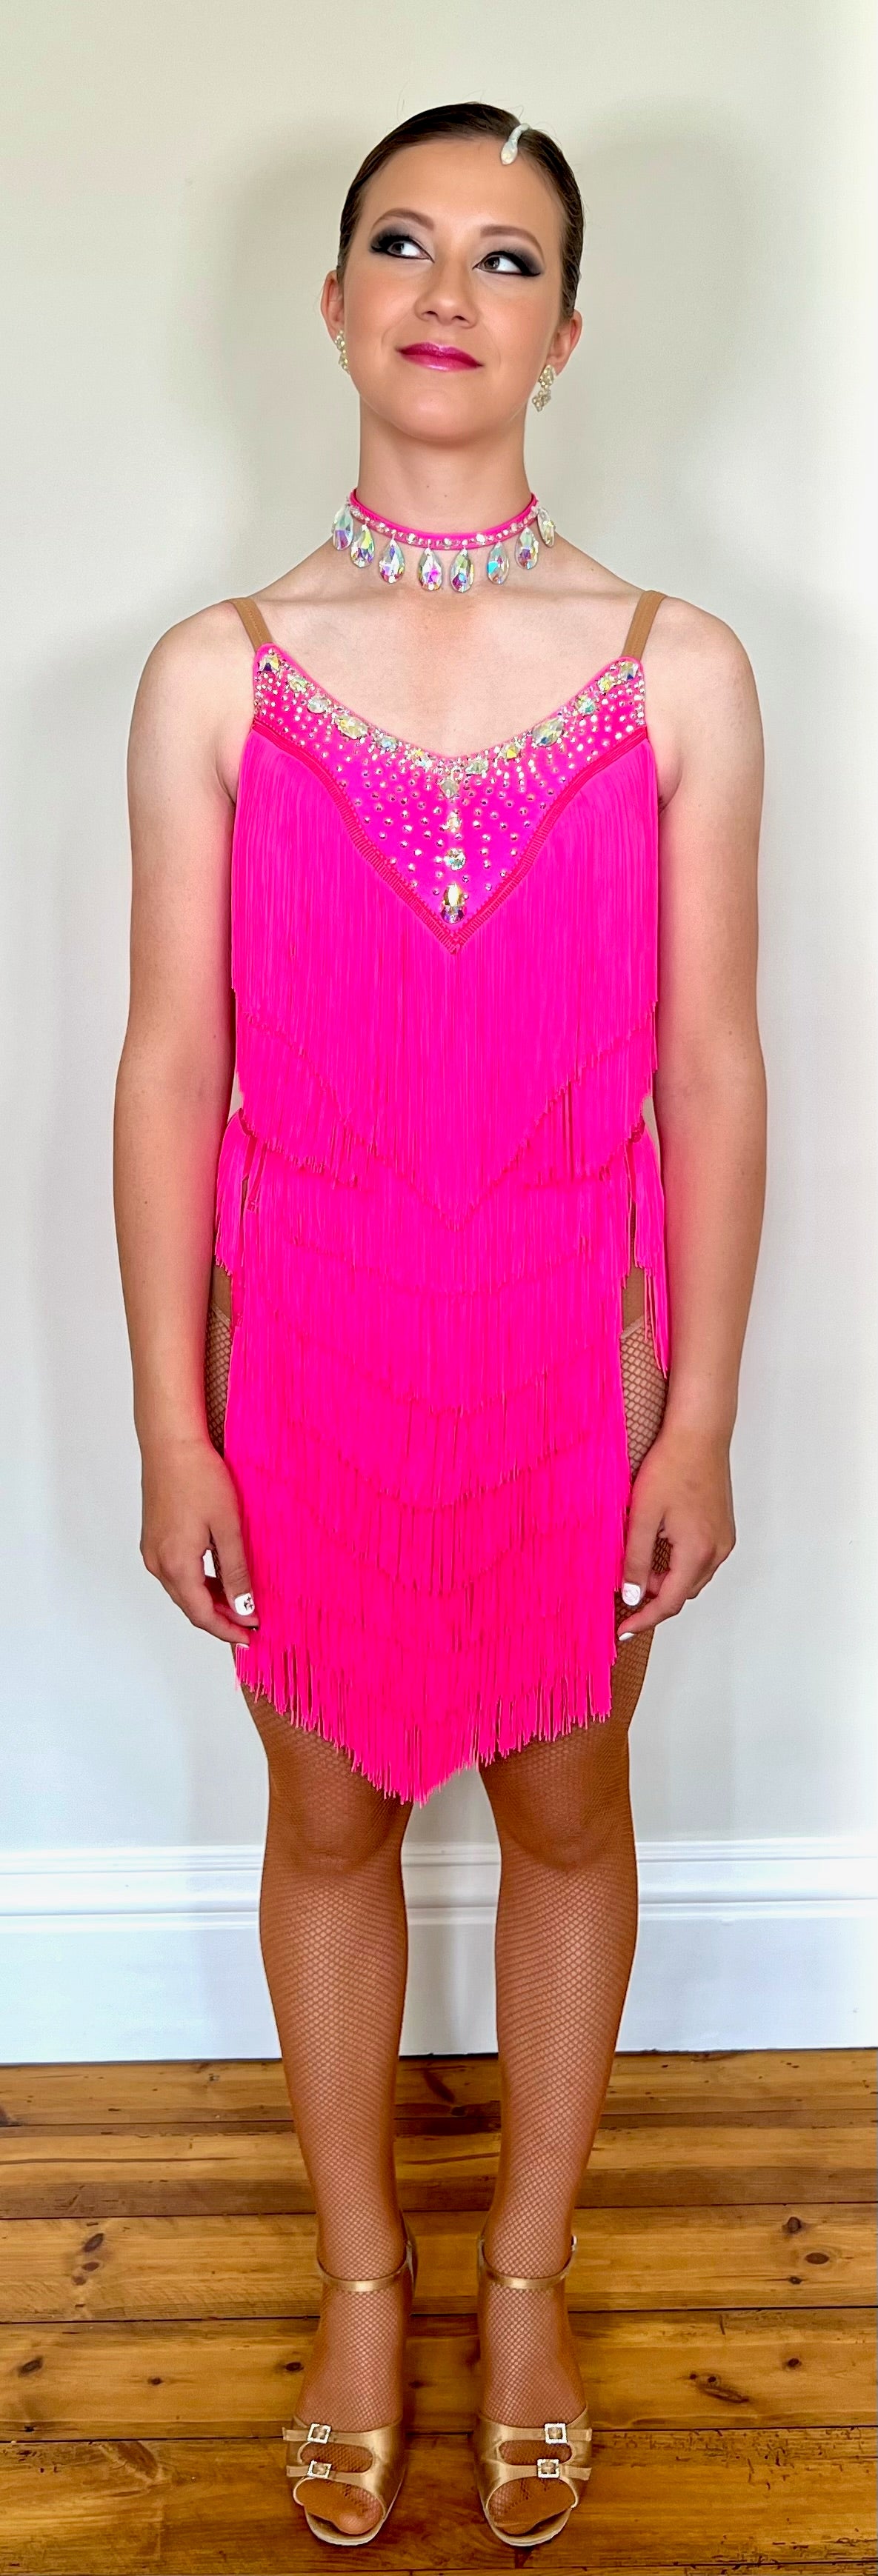 303 Flo Pink Latin Dress. Full fringed skirt decorated in AB Stones & open back detail